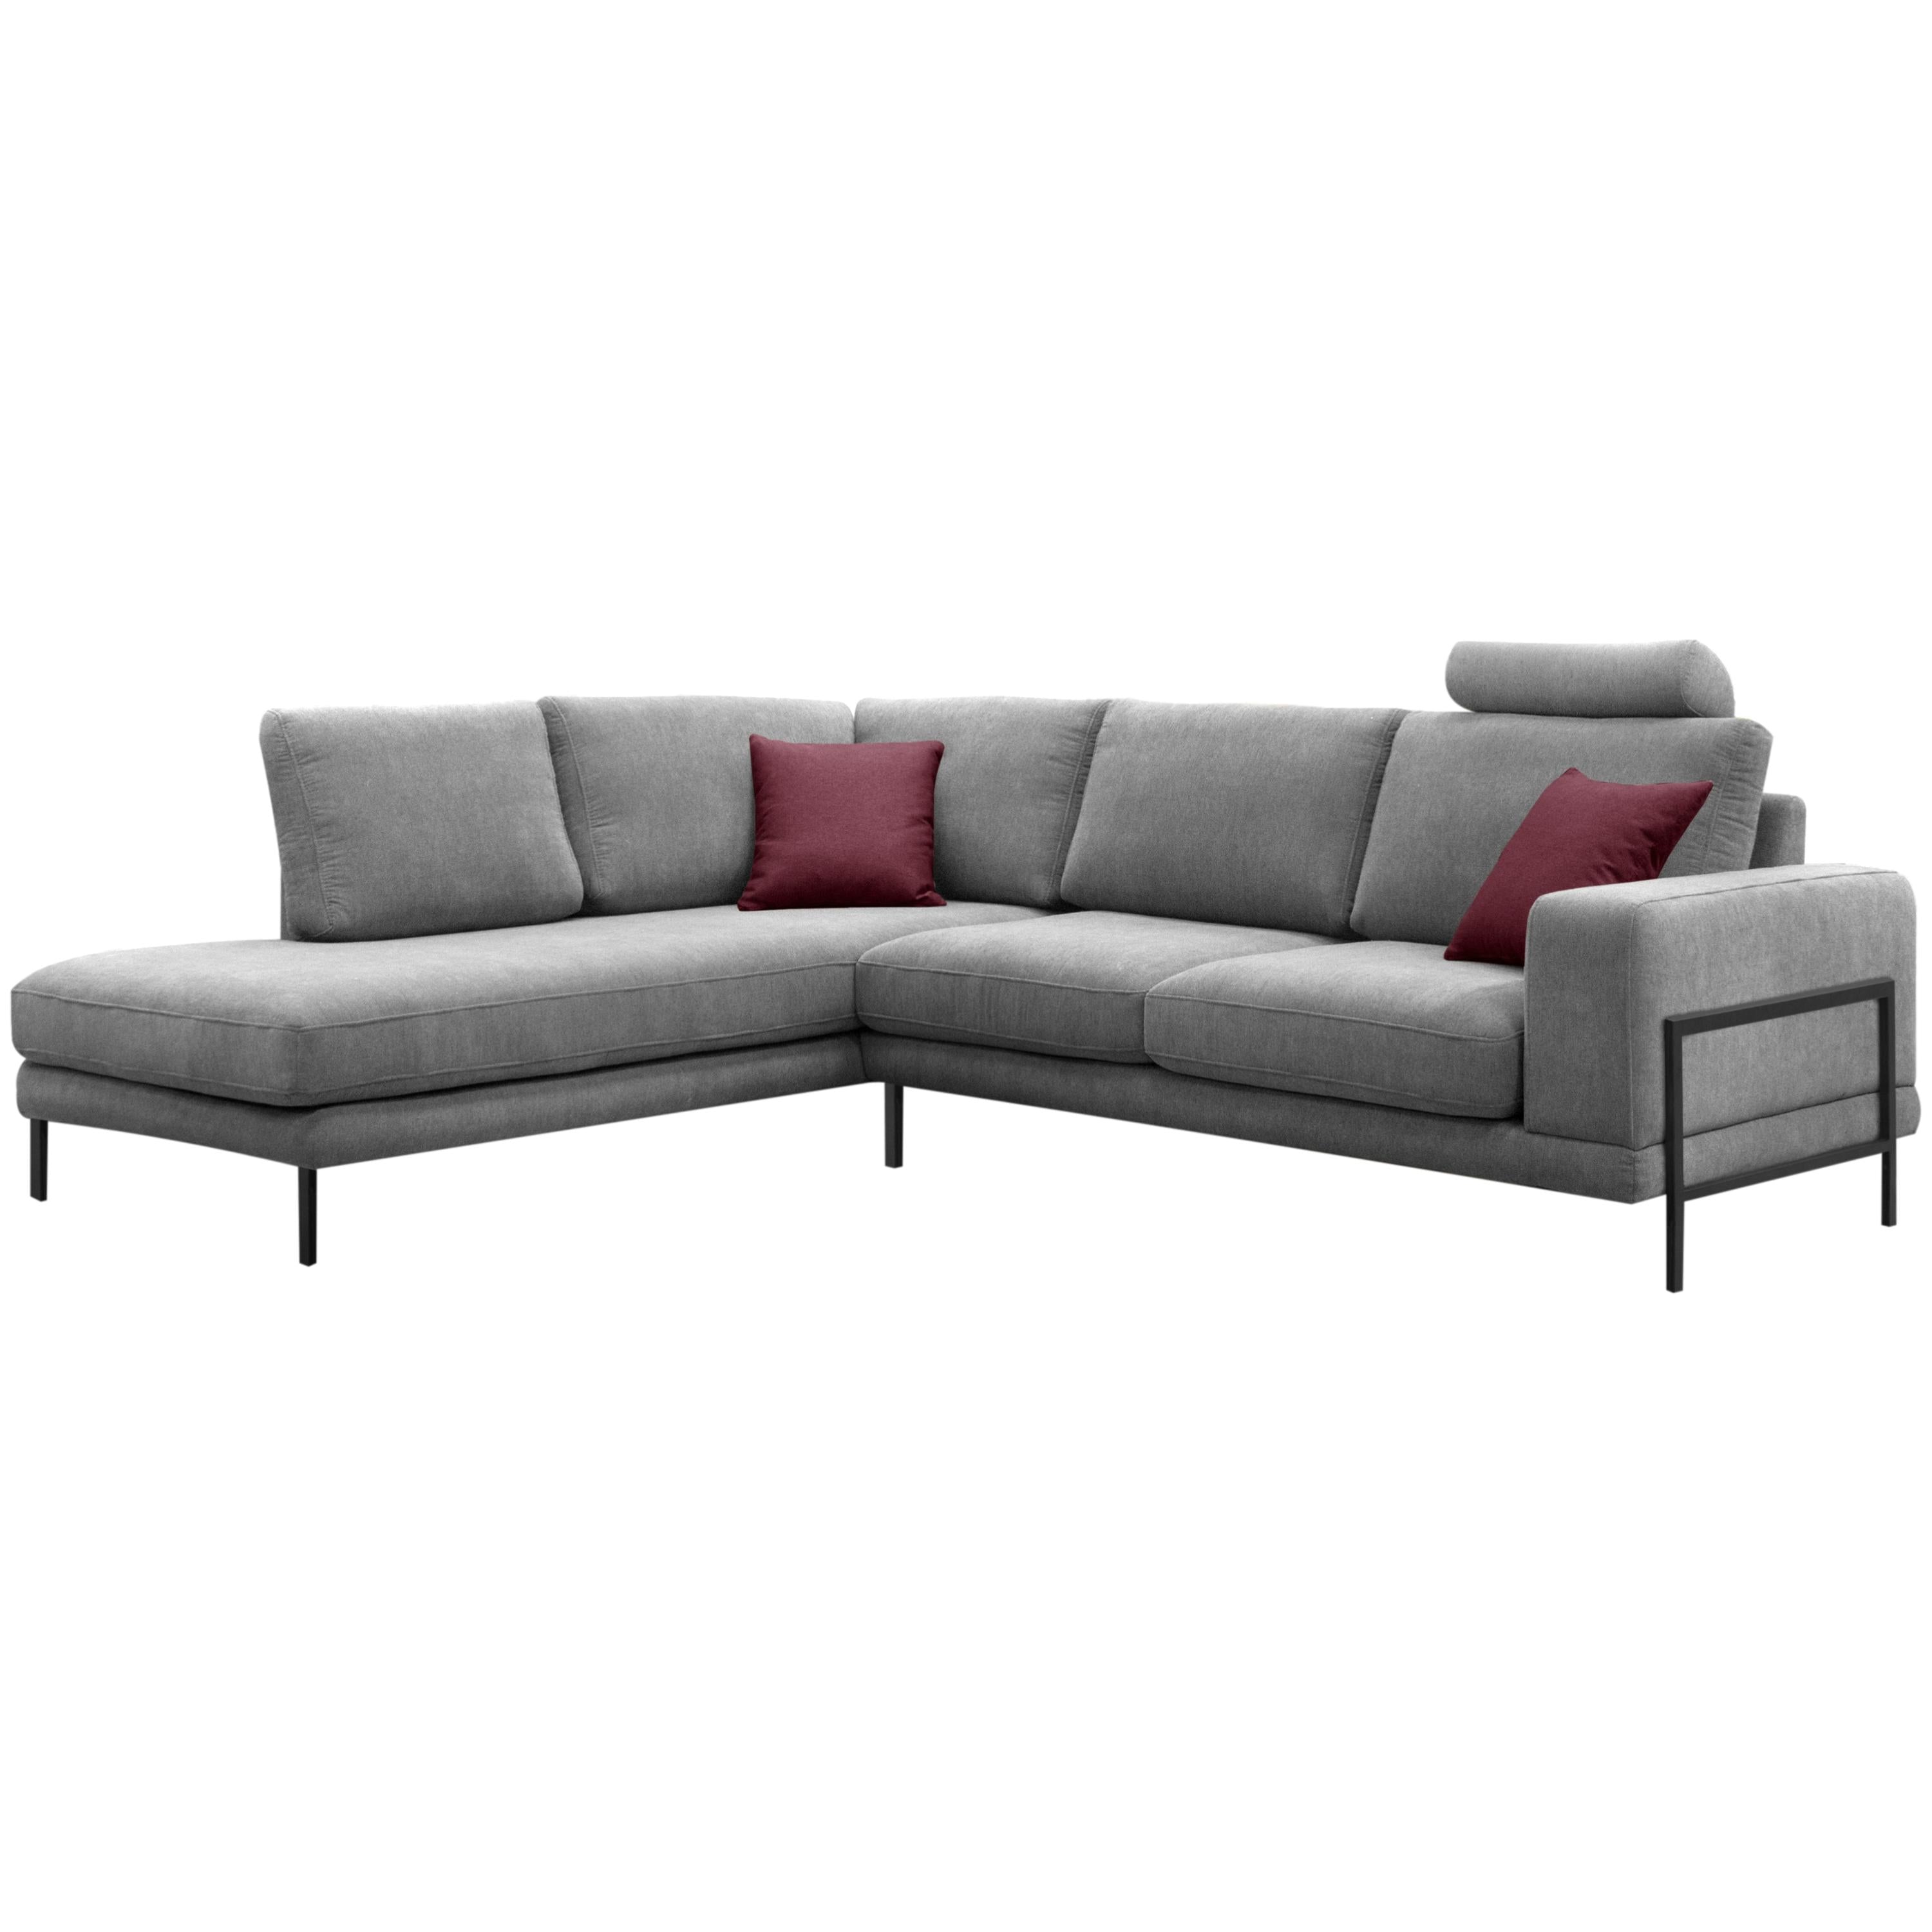 ViscoLogic FLAVIUS European  Mid Century Sofa with Wooden Frame with High Resilience Foam and Sturdy Metal Legs (Right Orientation)